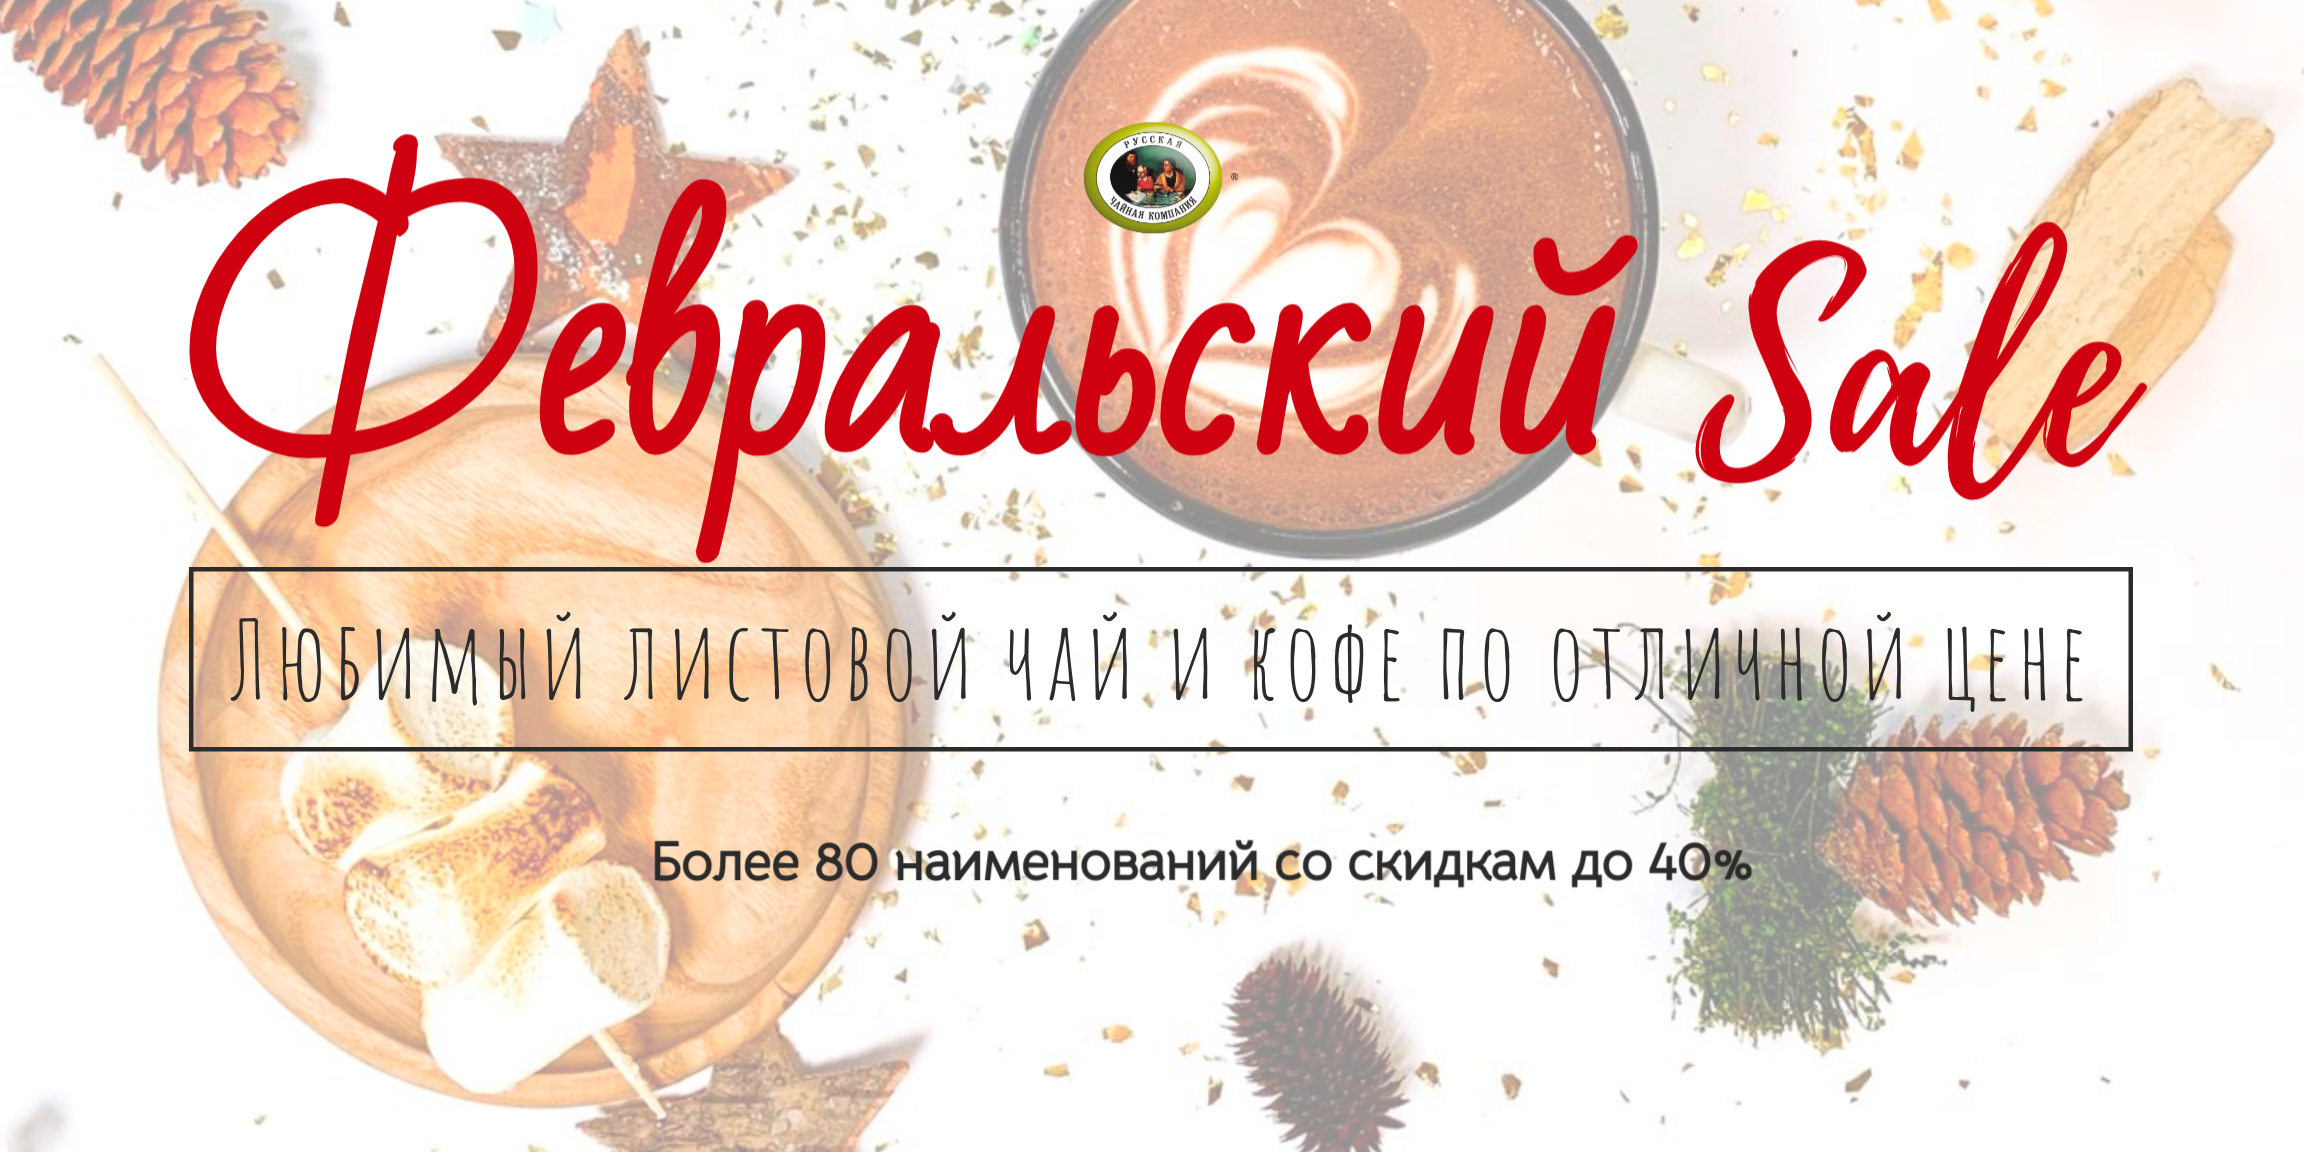 Holiday-Coffee-Shop-Website-Header (1).png